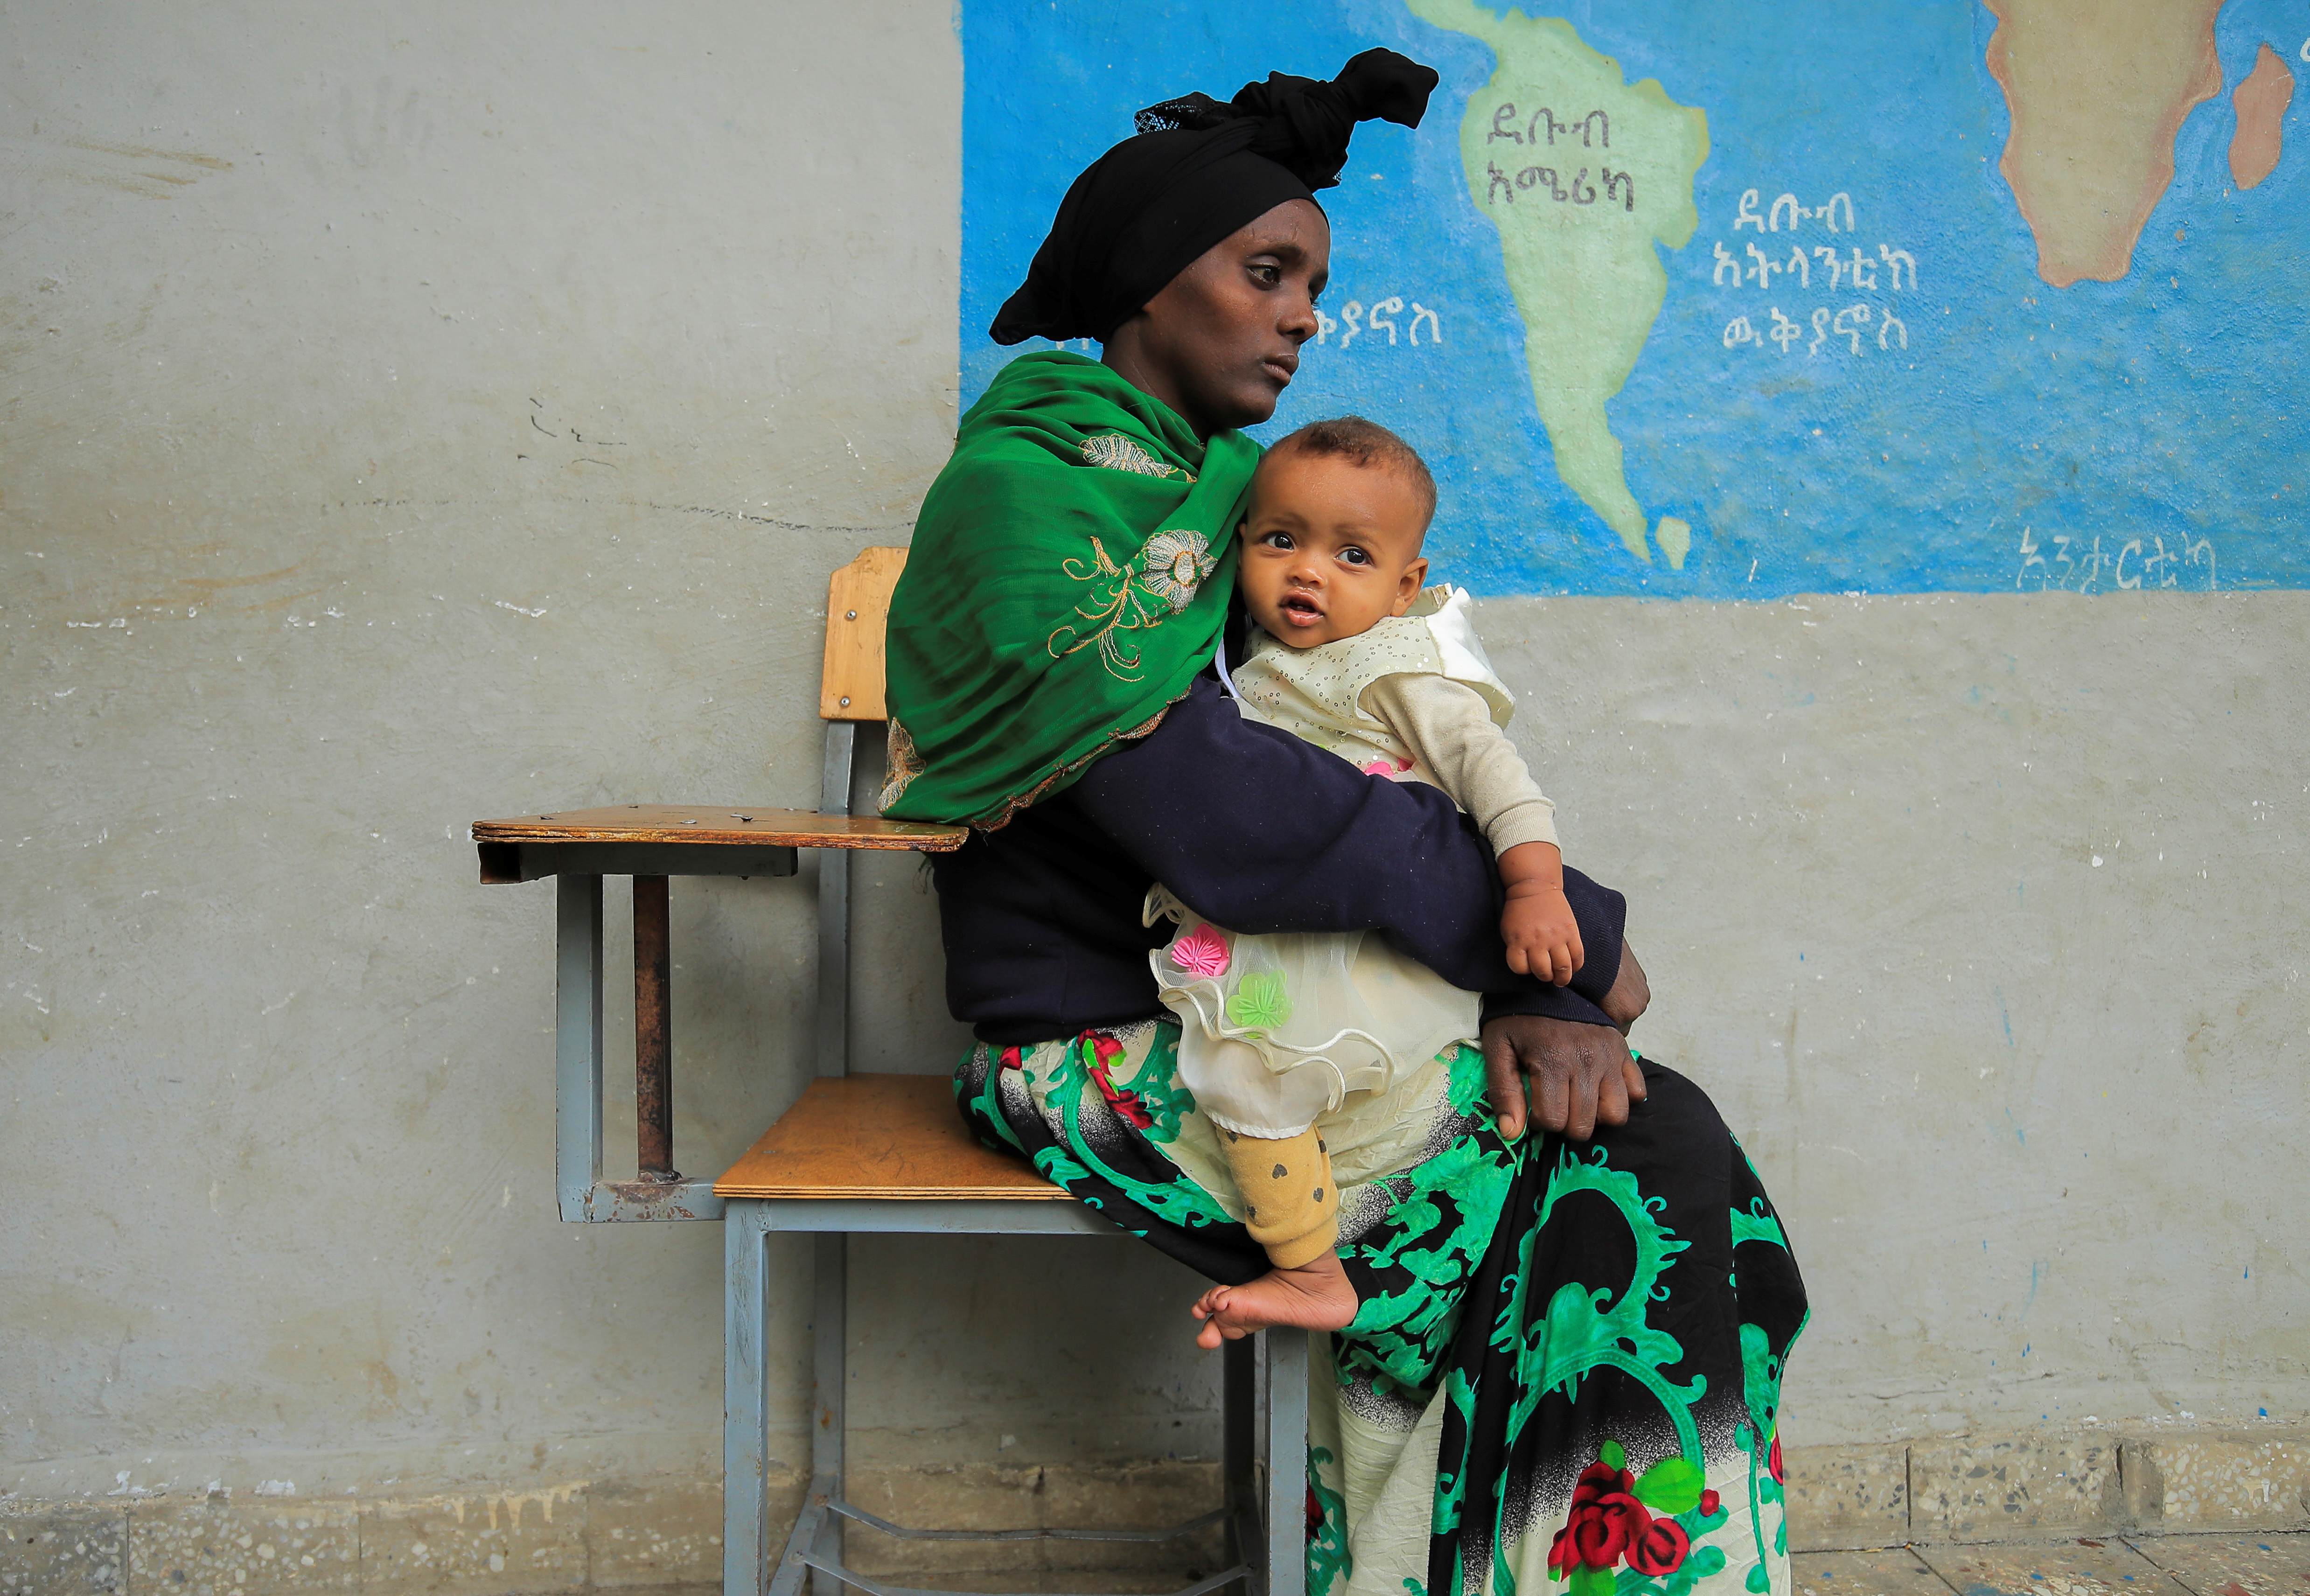 Habtam Akele, 27, carries her nine-months-old daughter, Kalkidan Alemu as they sit at a school makeshift camp for internally displaced people due to the fighting between the Ethiopian National Defense Force (ENDF) and the Tigray People's Liberation Front (TPLF) forces, in Dessie town, Amhara Region, Ethiopia, October 9, 2021. REUTERS/Tiksa Negeri